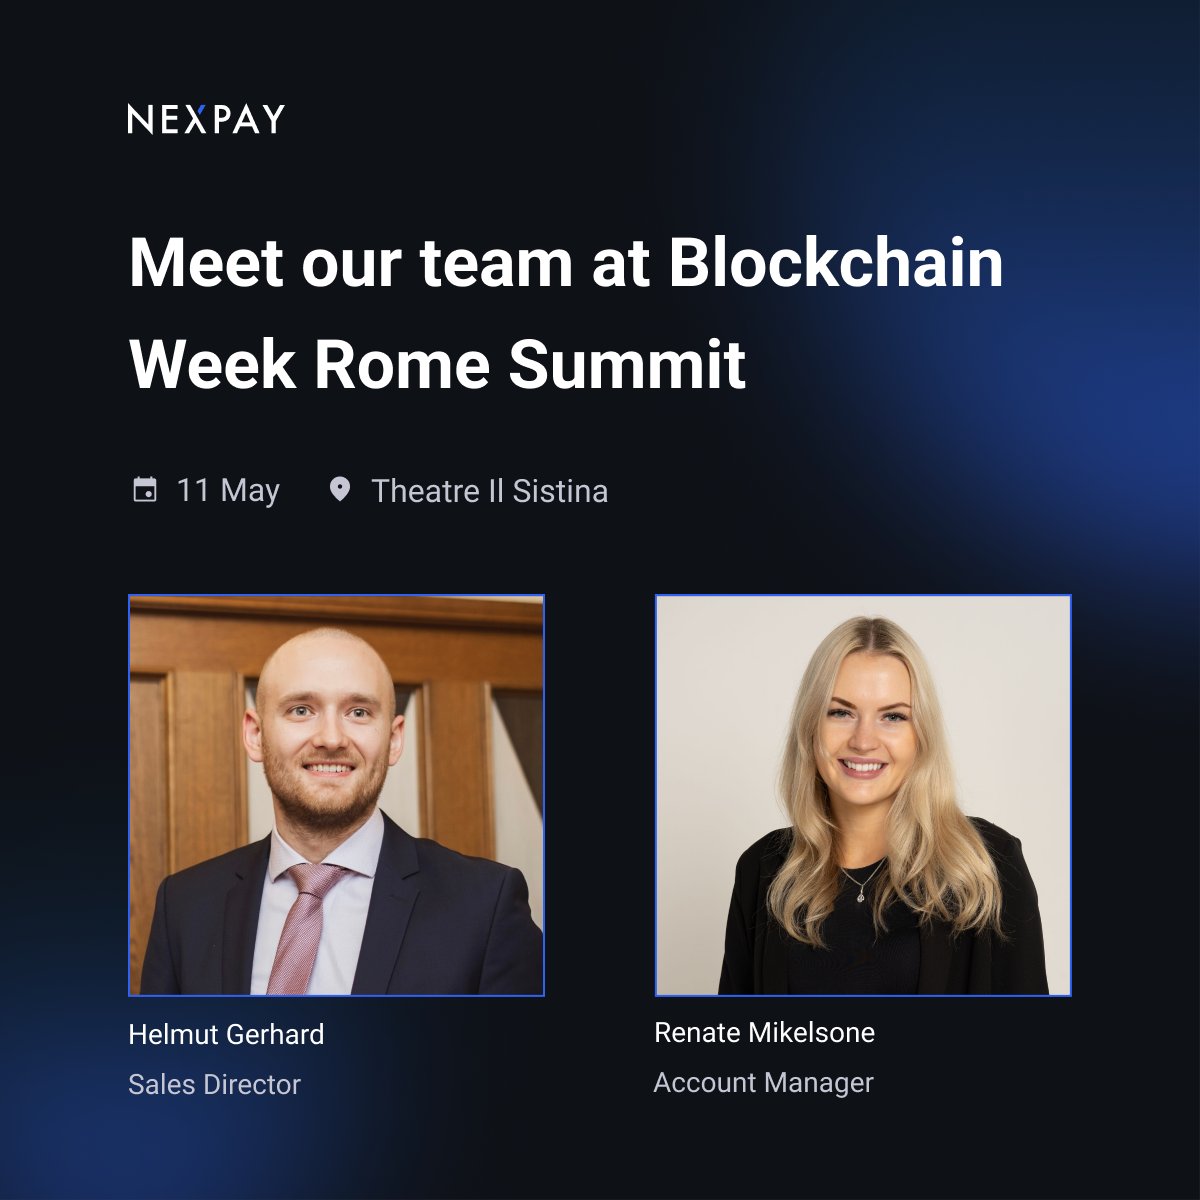 Our Sales Director Helmut Gerhard and Account Manager Renate Mikelsone will be visiting @blockchainrome Summit tomorrow, 11th May. Reach out to them on LinkedIn to arrange a meeting!

#Nexpay #fintech #digital #payments #banking #finserv #conference #BWR23 #blockchain